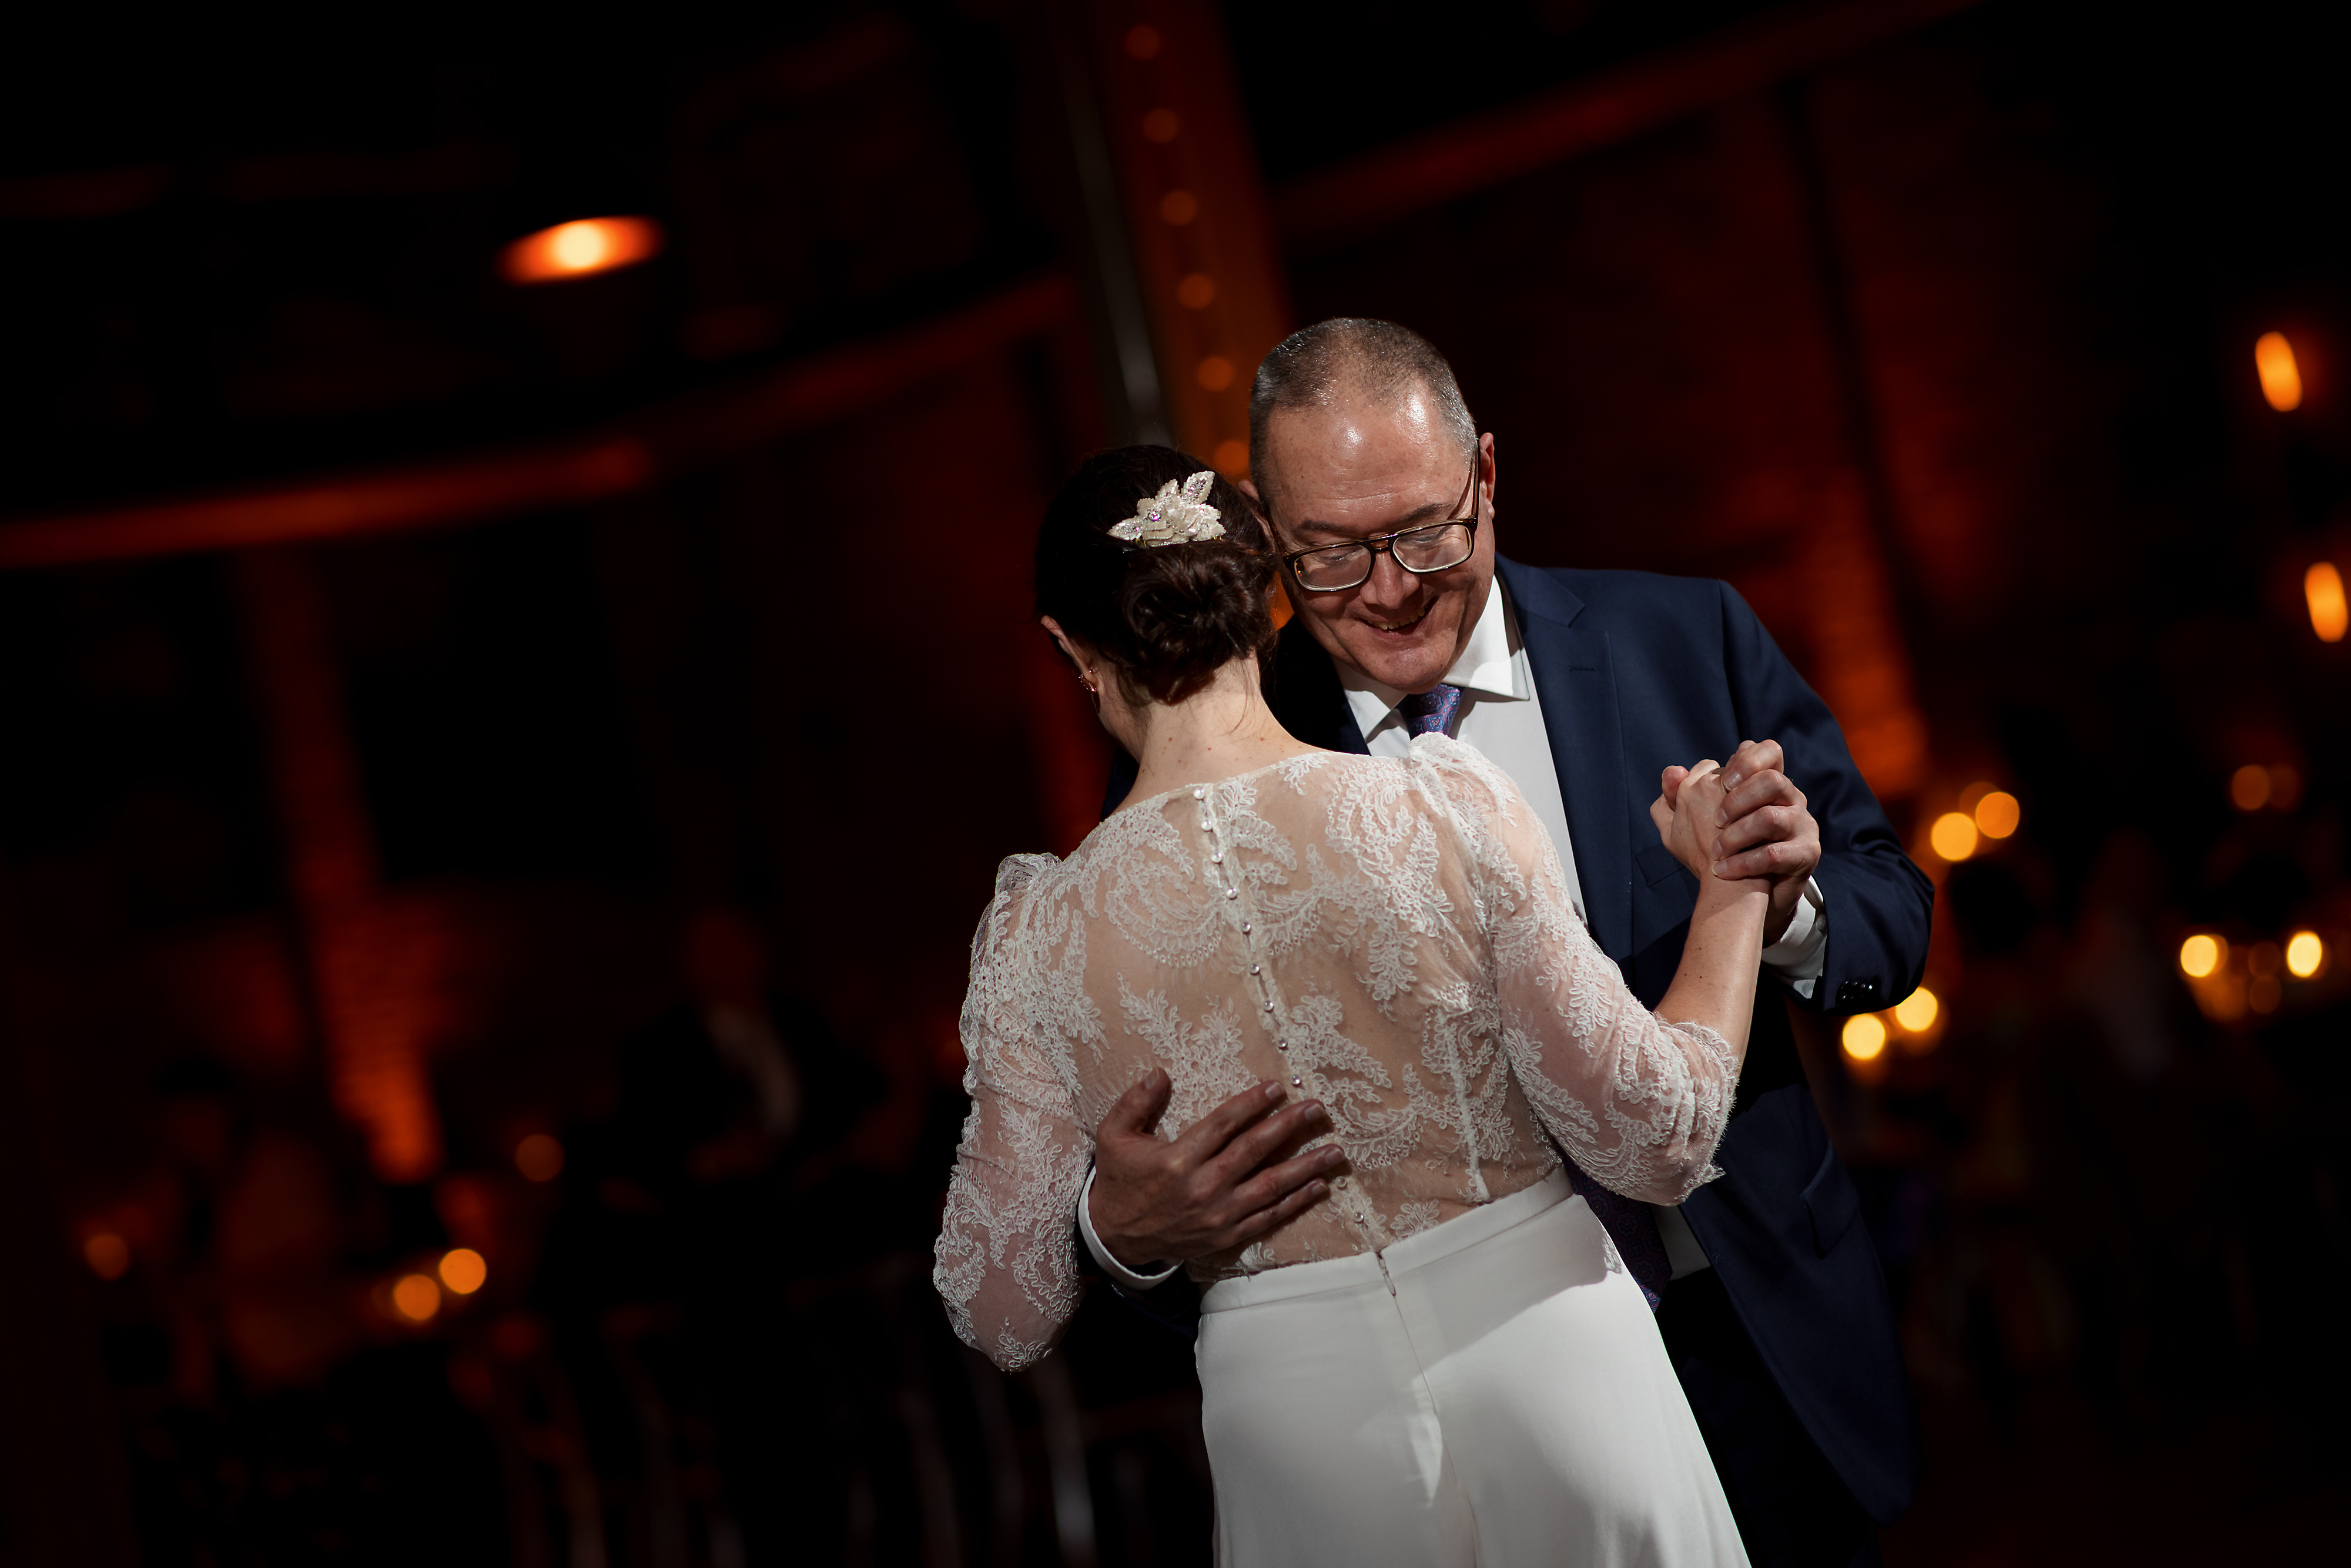 Bride dances with father during wedding reception at The Fairlie